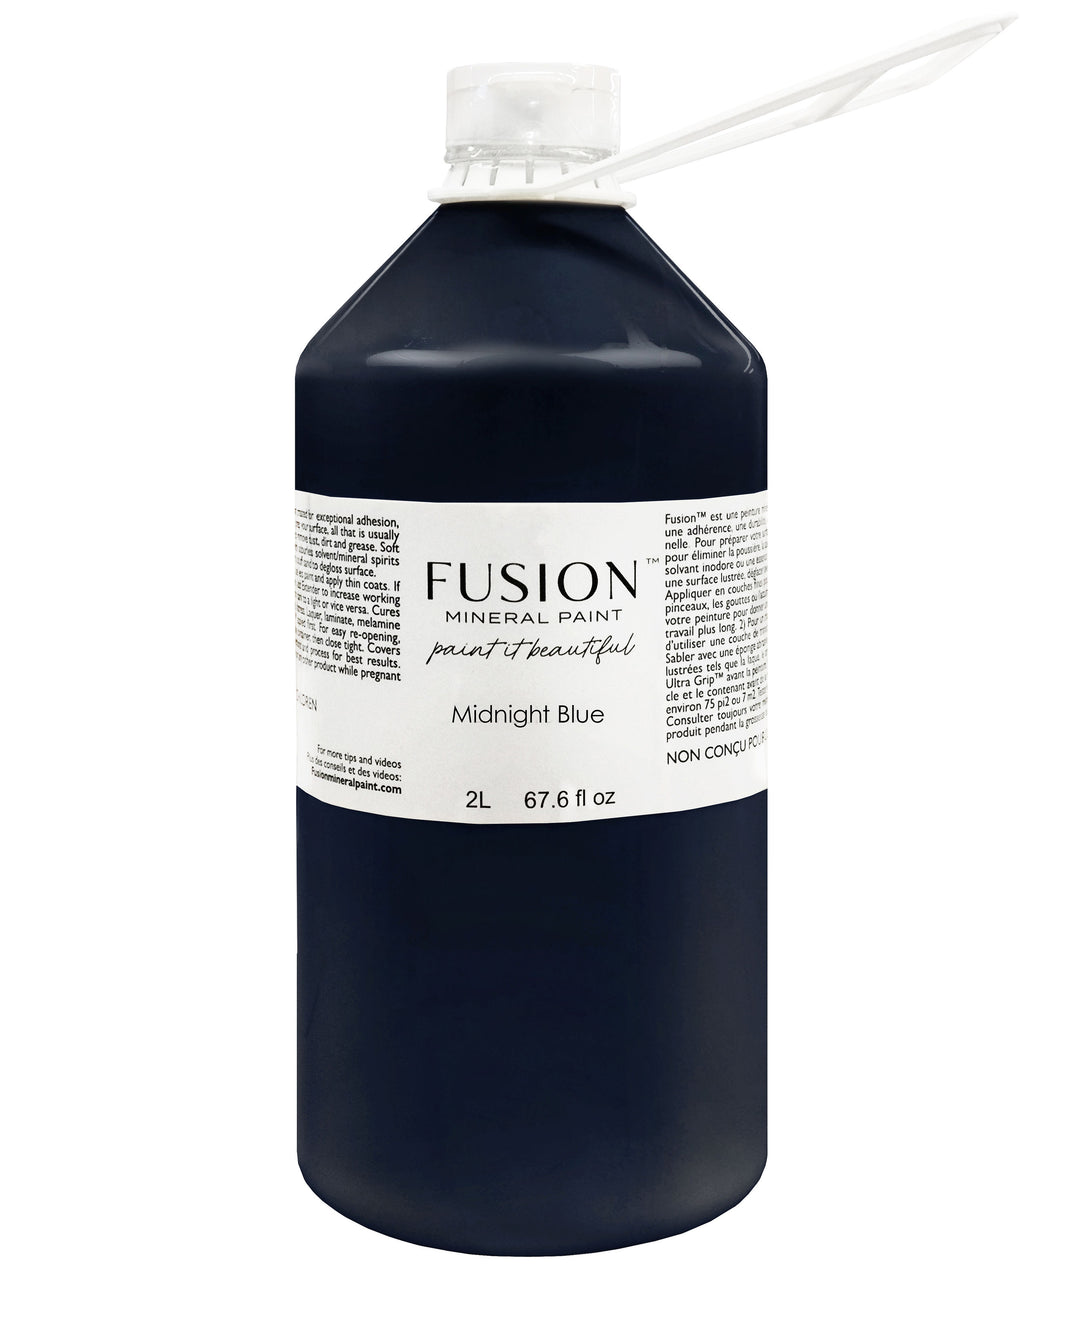 Midnight blue 2L container from Fusion Mineral Paint